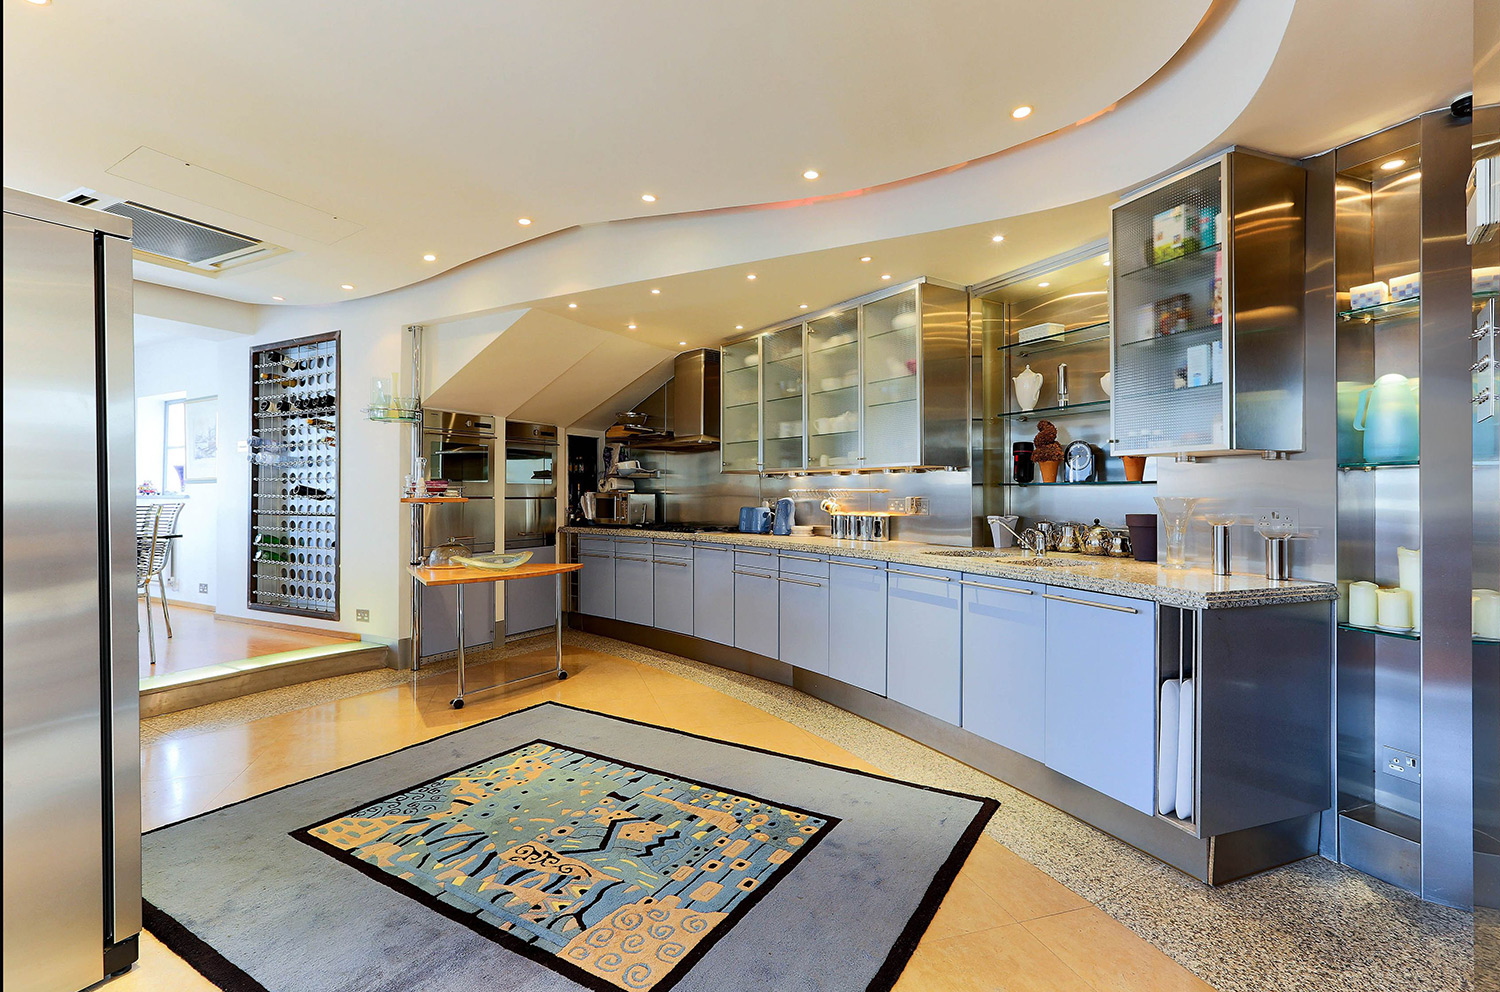 Interior views of The High Command penthouse in London